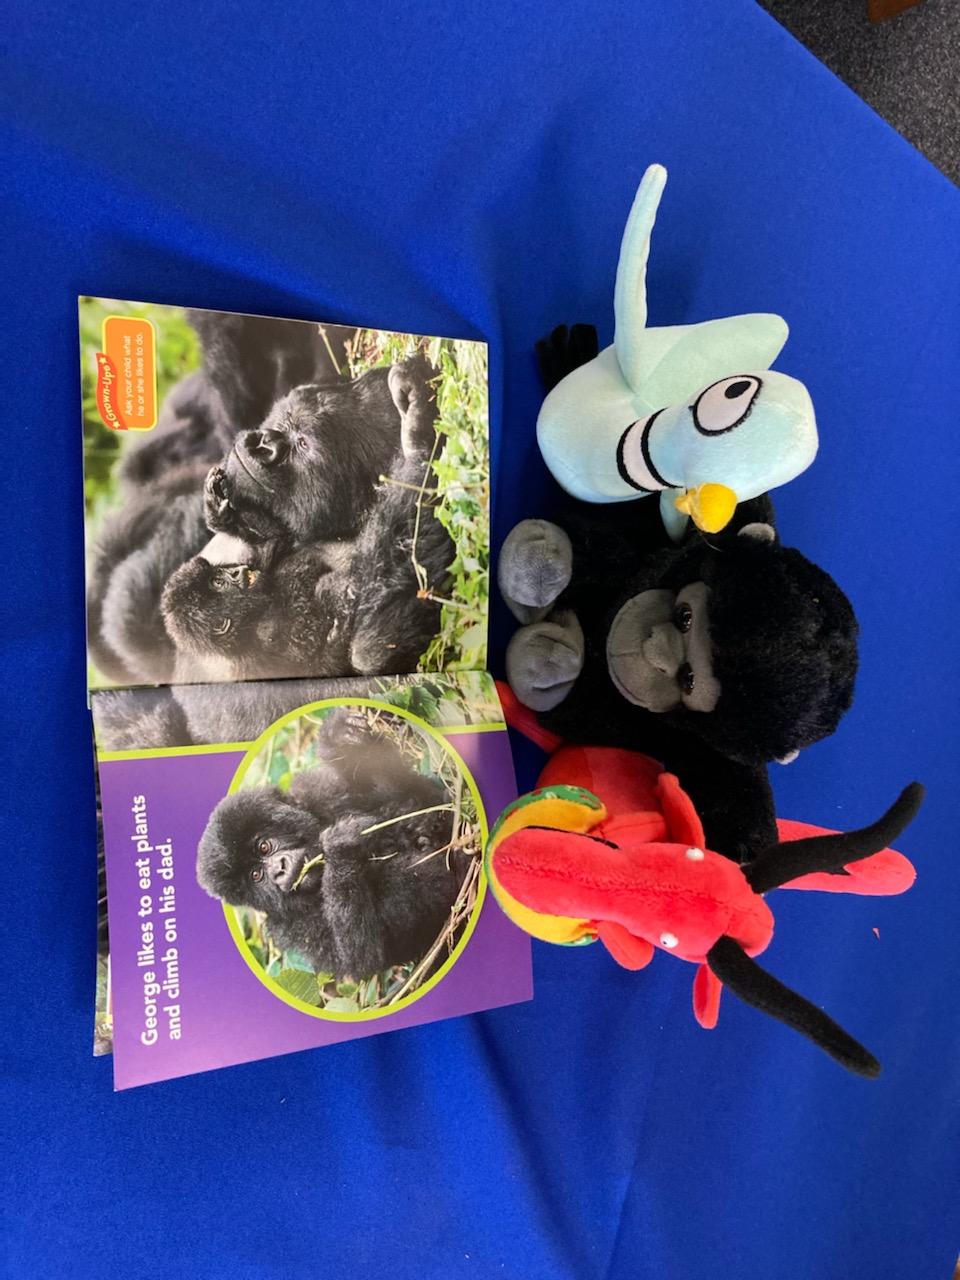 Toy Pigeon, Gorilla, and Dragon reading about gorillas